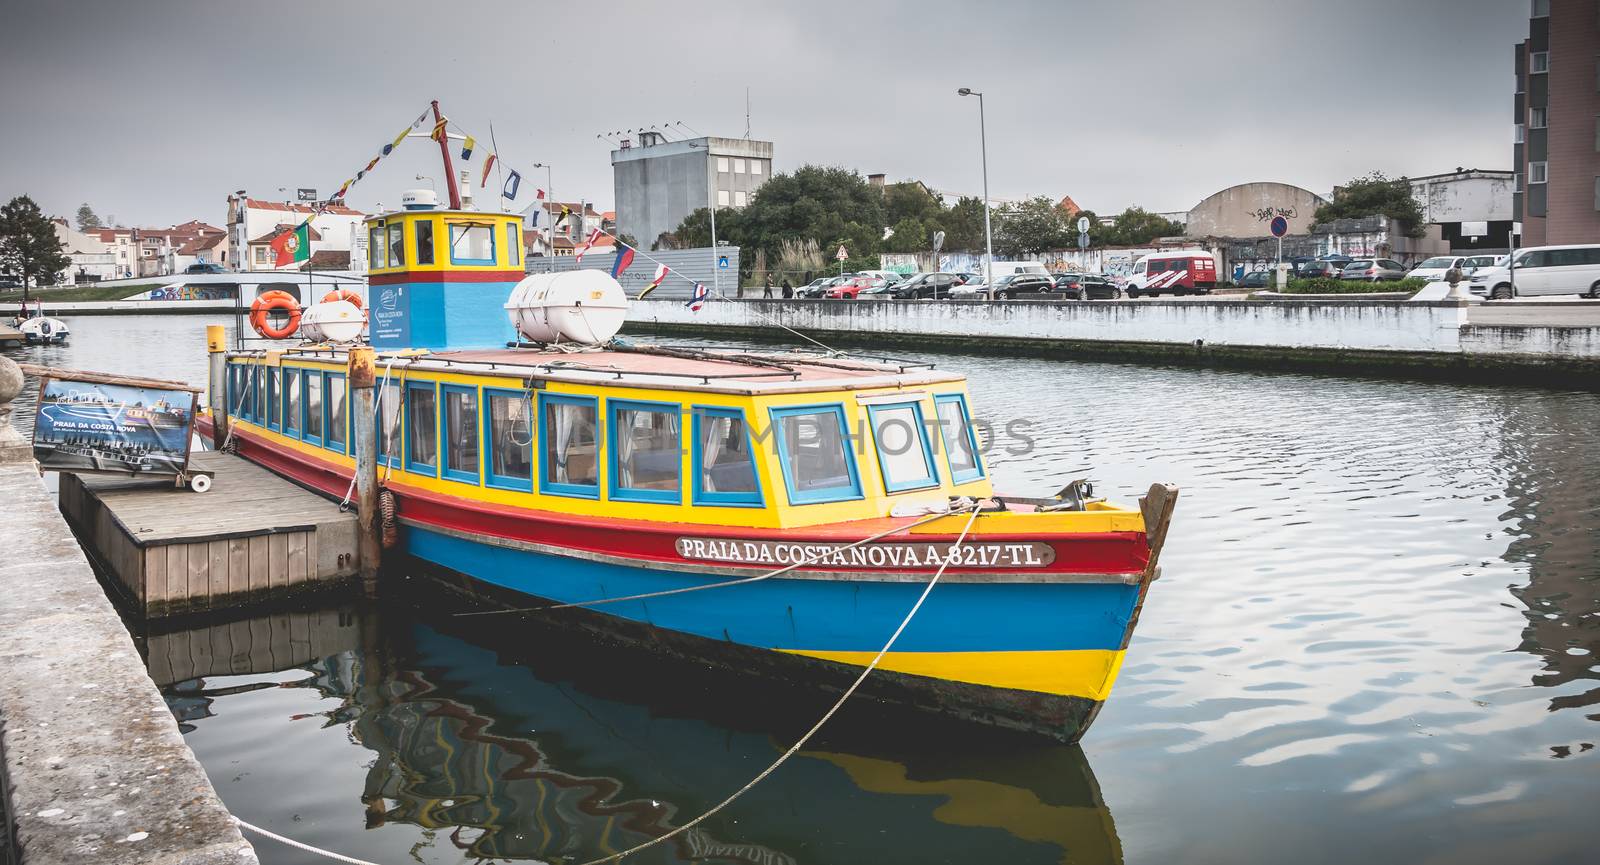 Aveiro, Portugal - May 7, 2018: Tourist transport boat docked at the end of the day on a spring day